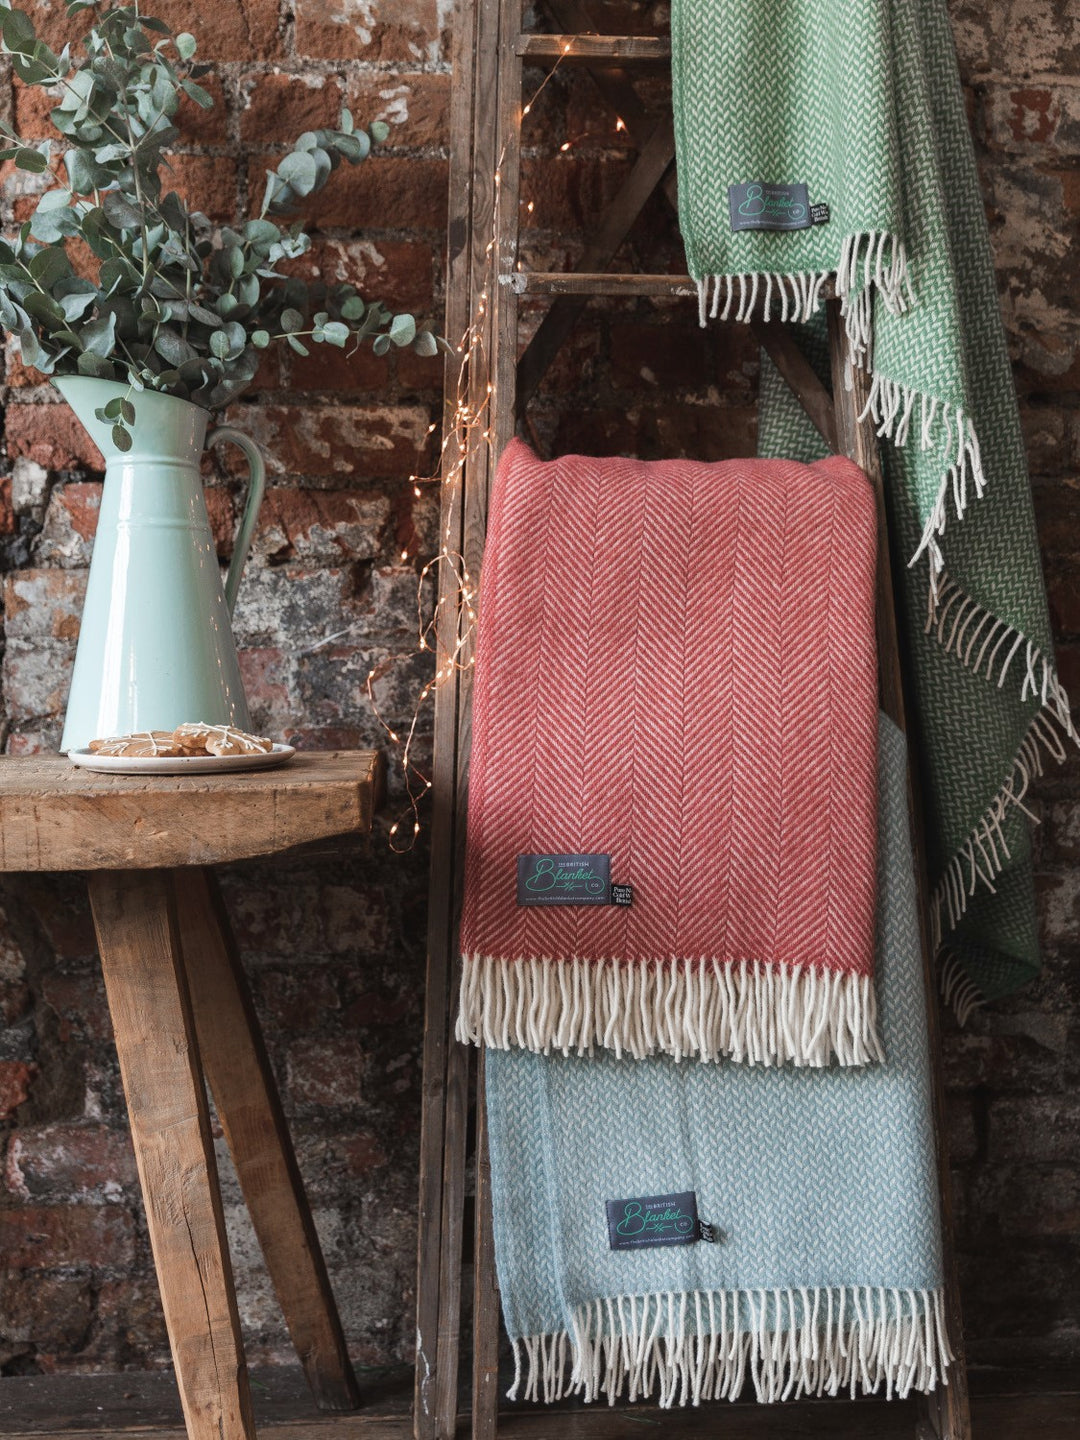 Three wool blankets in red, green, and blue hanging on a wooden ladder